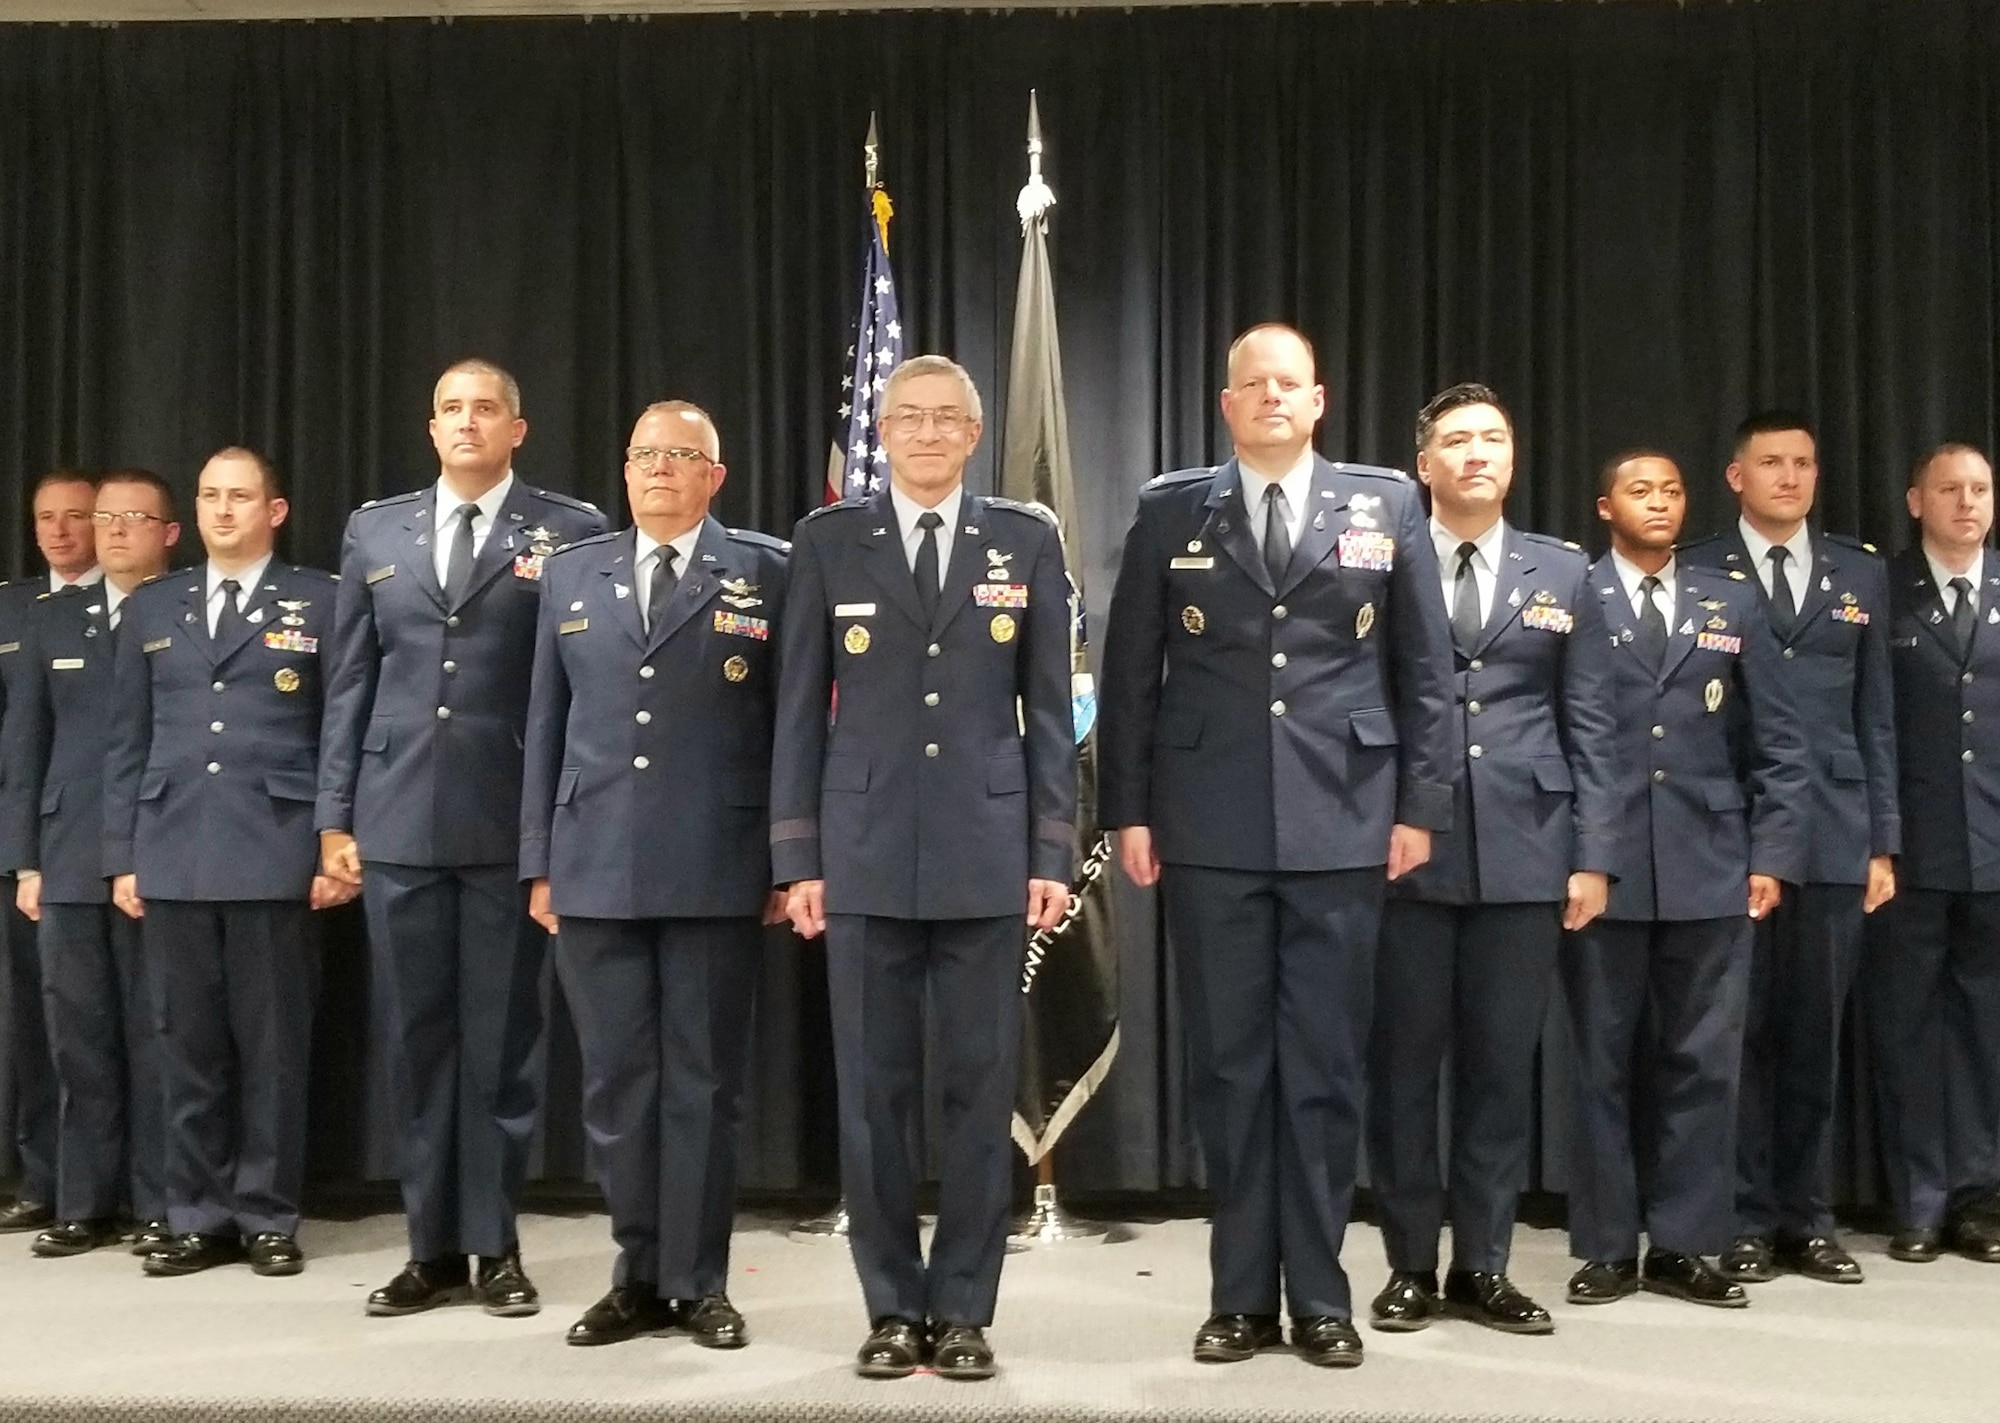 Ten officers from the Air Force Research Laboratory and Space and Missile Systems Center space units at Kirtland AFB, N.M. were inducted into the U.S. Space Force in a ceremony held at Kirtland July 23. Maj. Gen. Neil McCasland (USAF Ret.), center, officiated the ceremony. (U.S. Air Force photo/Joanne Perkins)